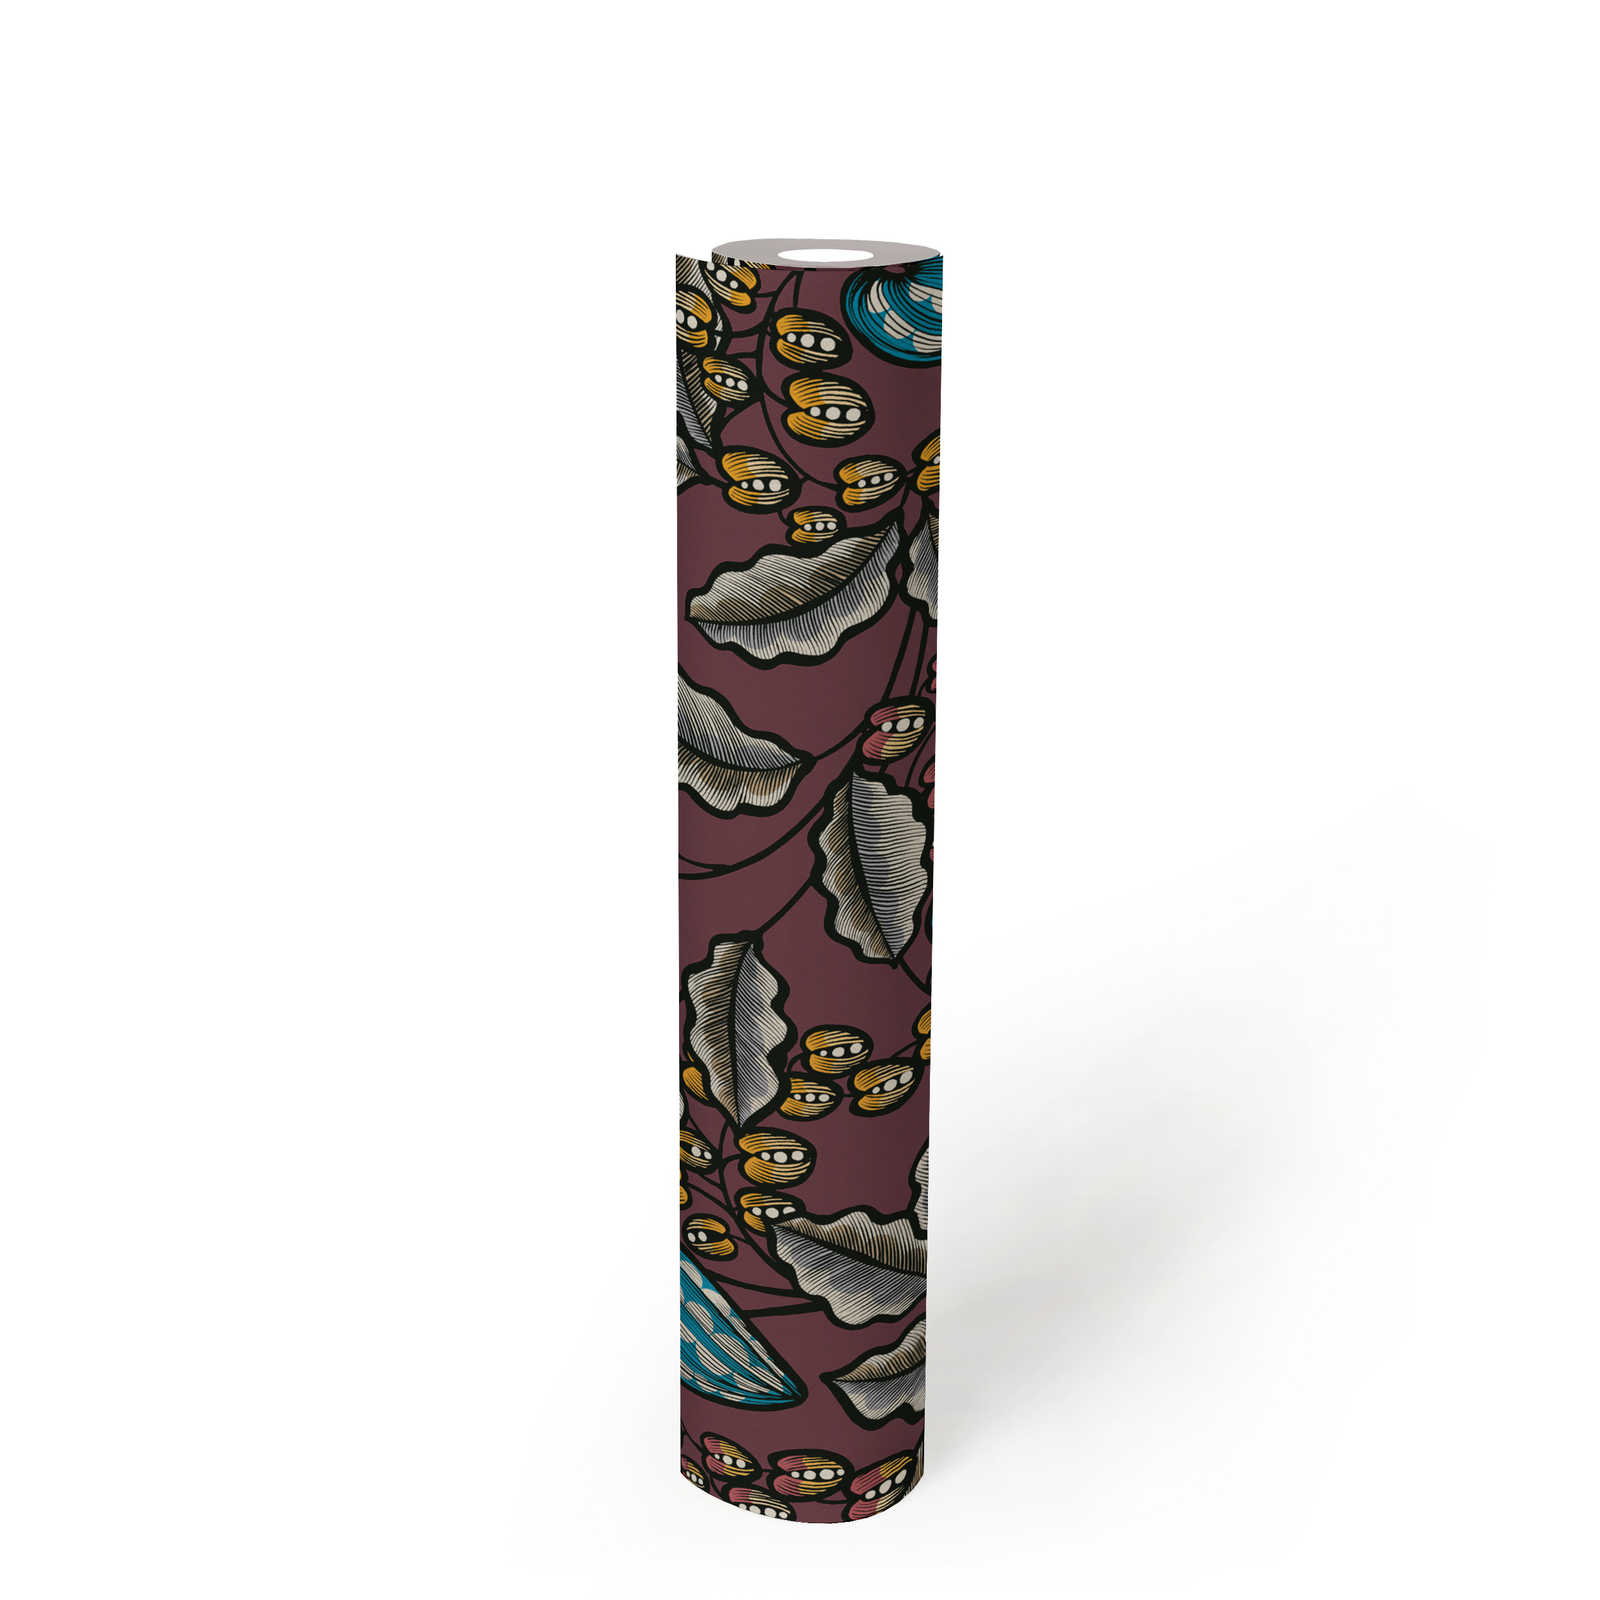             Floral wallpaper purple with leaves print in Scandinavian style
        